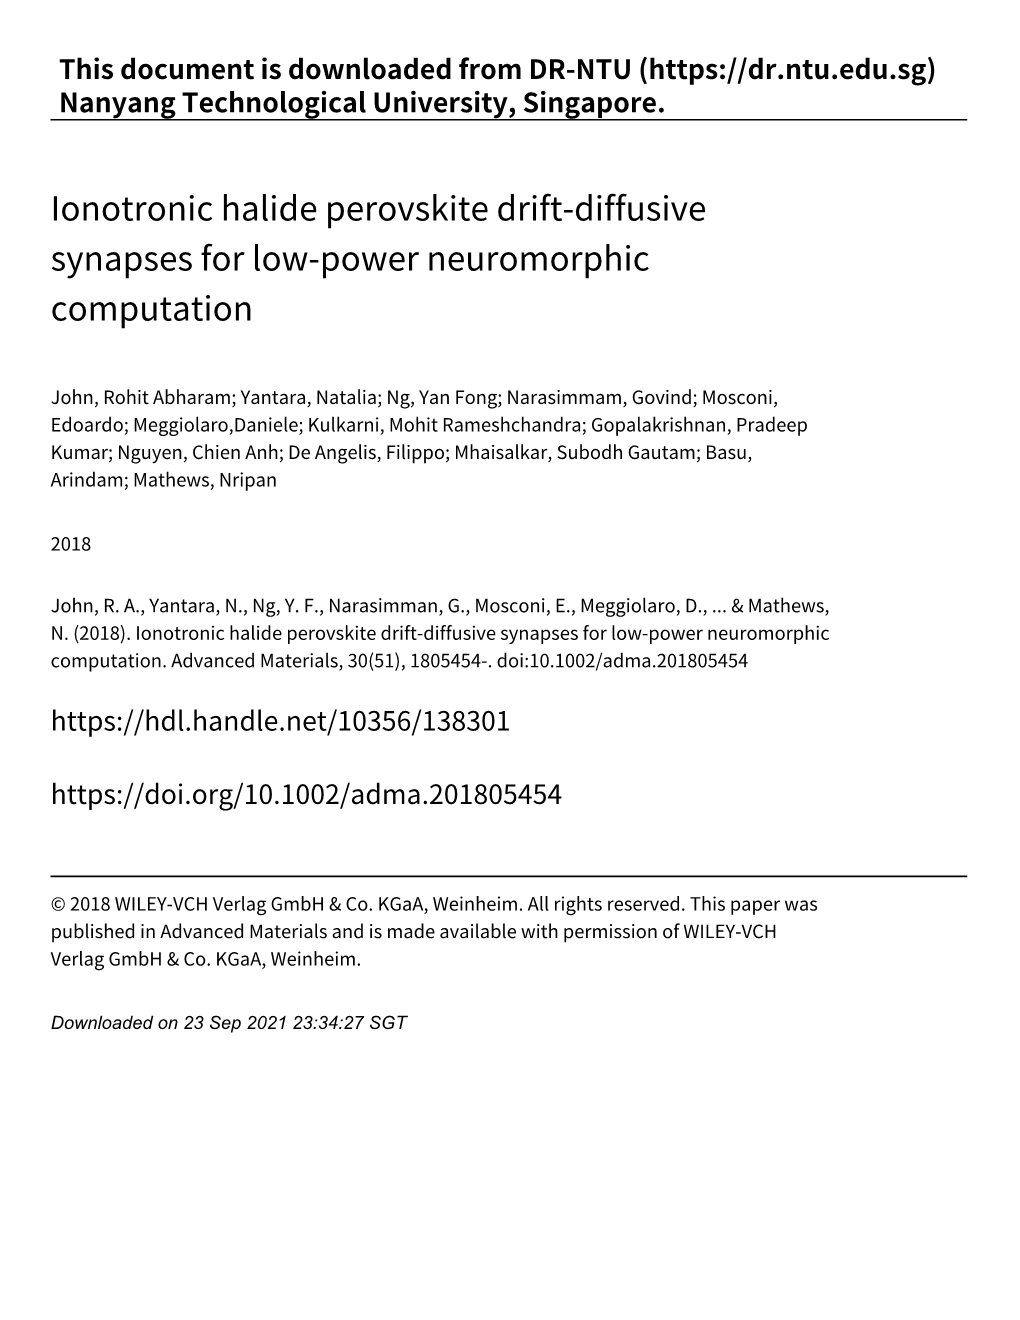 Ionotronic Halide Perovskite Drift‑Diffusive Synapses for Low‑Power Neuromorphic Computation